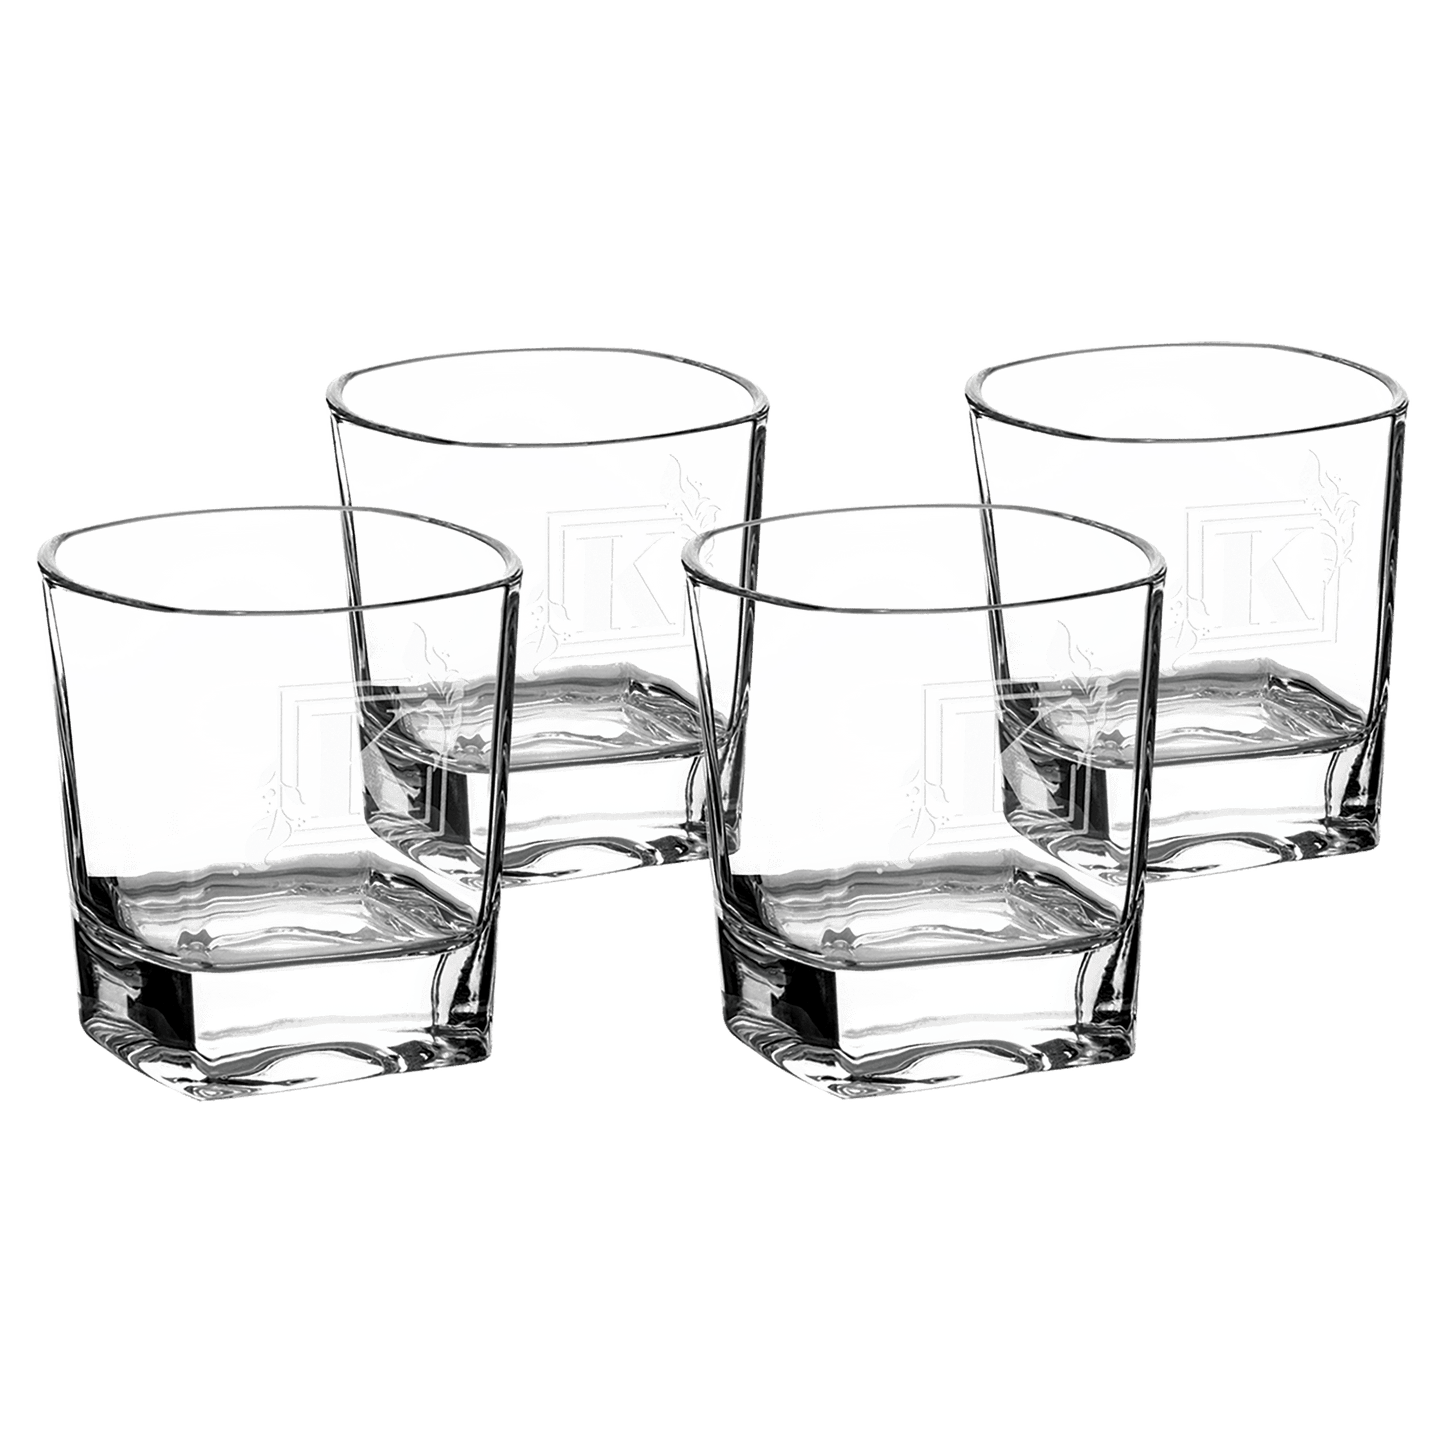 Set of Four 8 oz. Rectangle Rocks Glasses in a Gift Box